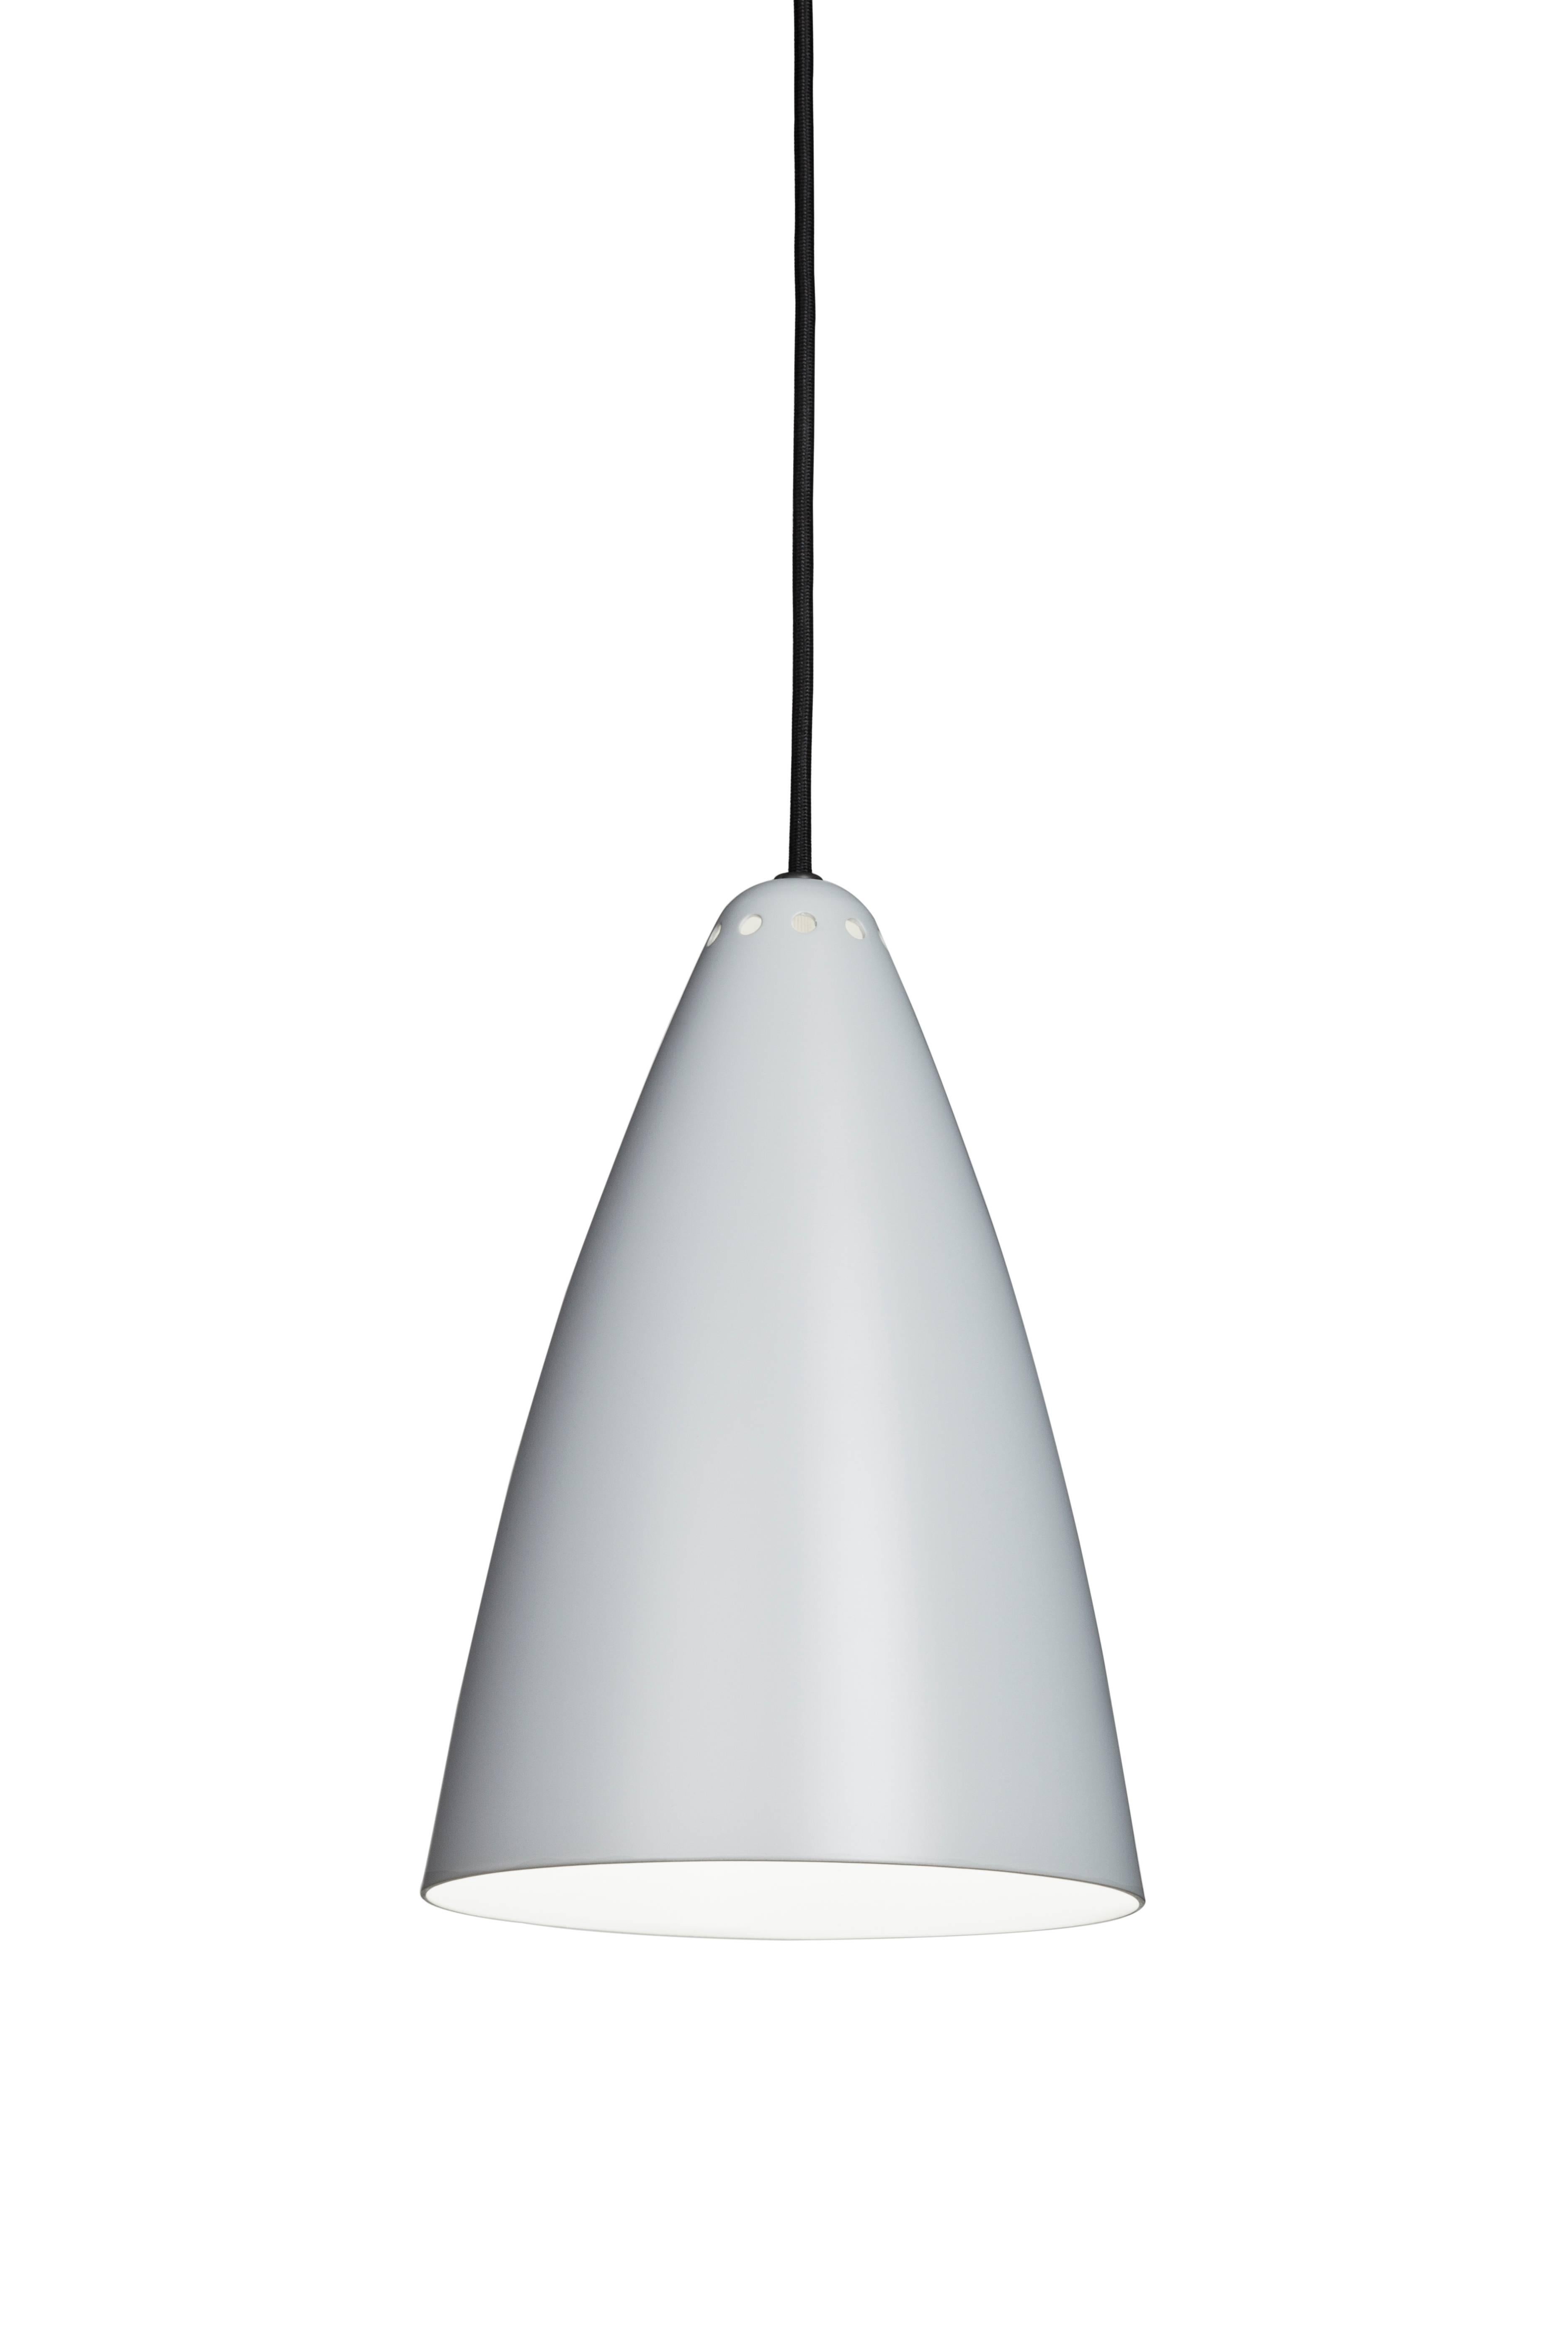 Lisa Johansson-Pape '1959' Black Pendant for Innolux Oy. Originally designed in 1959, these authorized re-editions are true to the original charming simplicity of Pape's iconic Finnish design. The white interior of each metallic shade efficiently